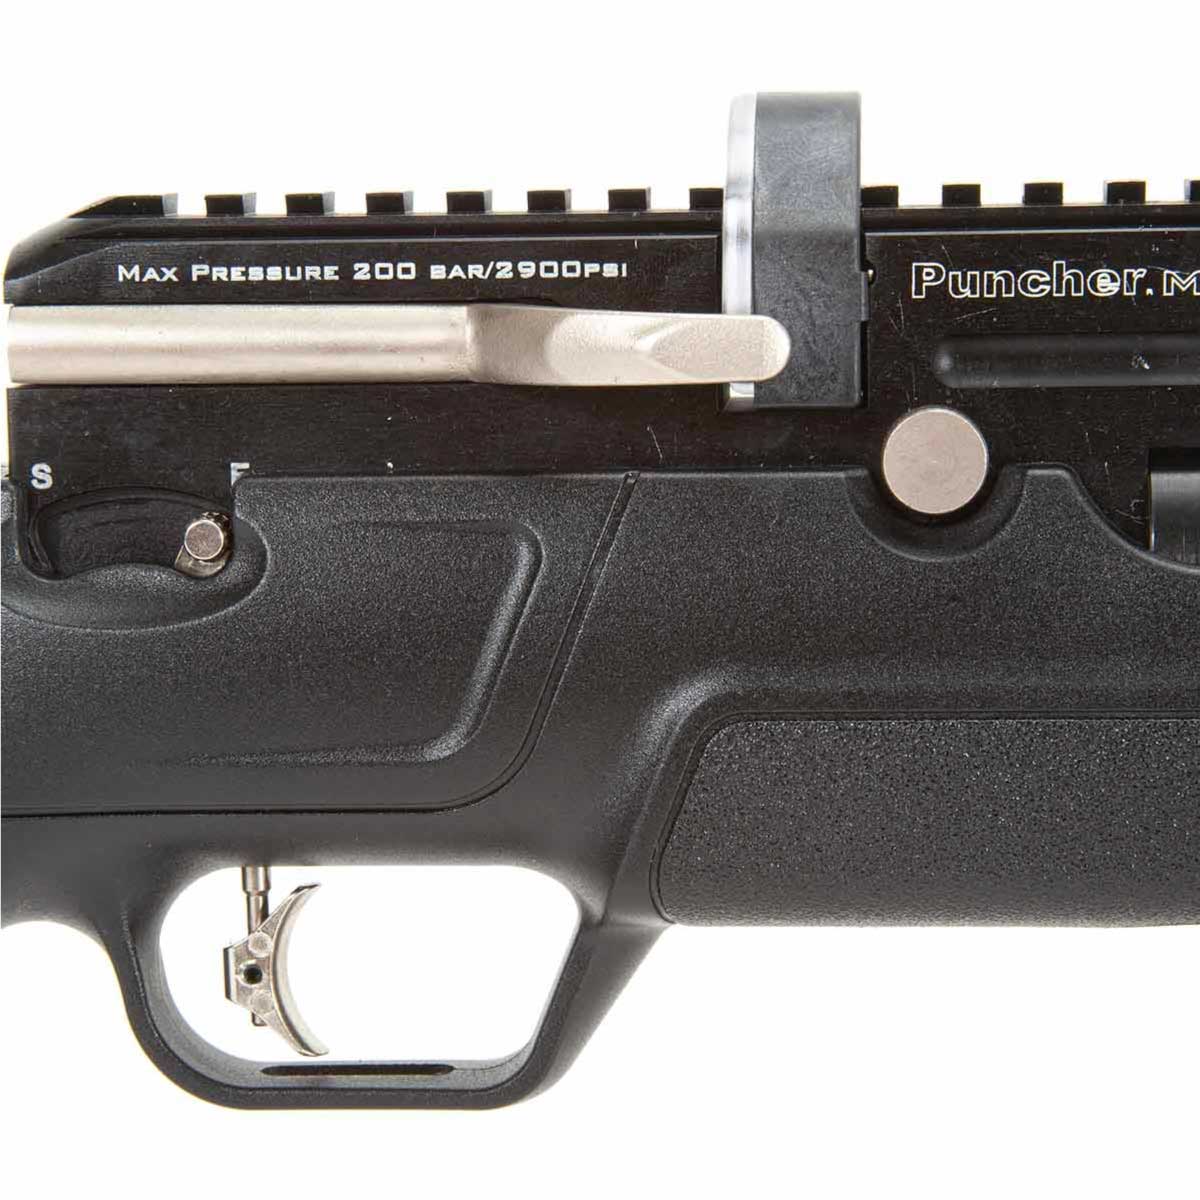 Carabina PCP Kral Puncher S Cal. 6.35mm